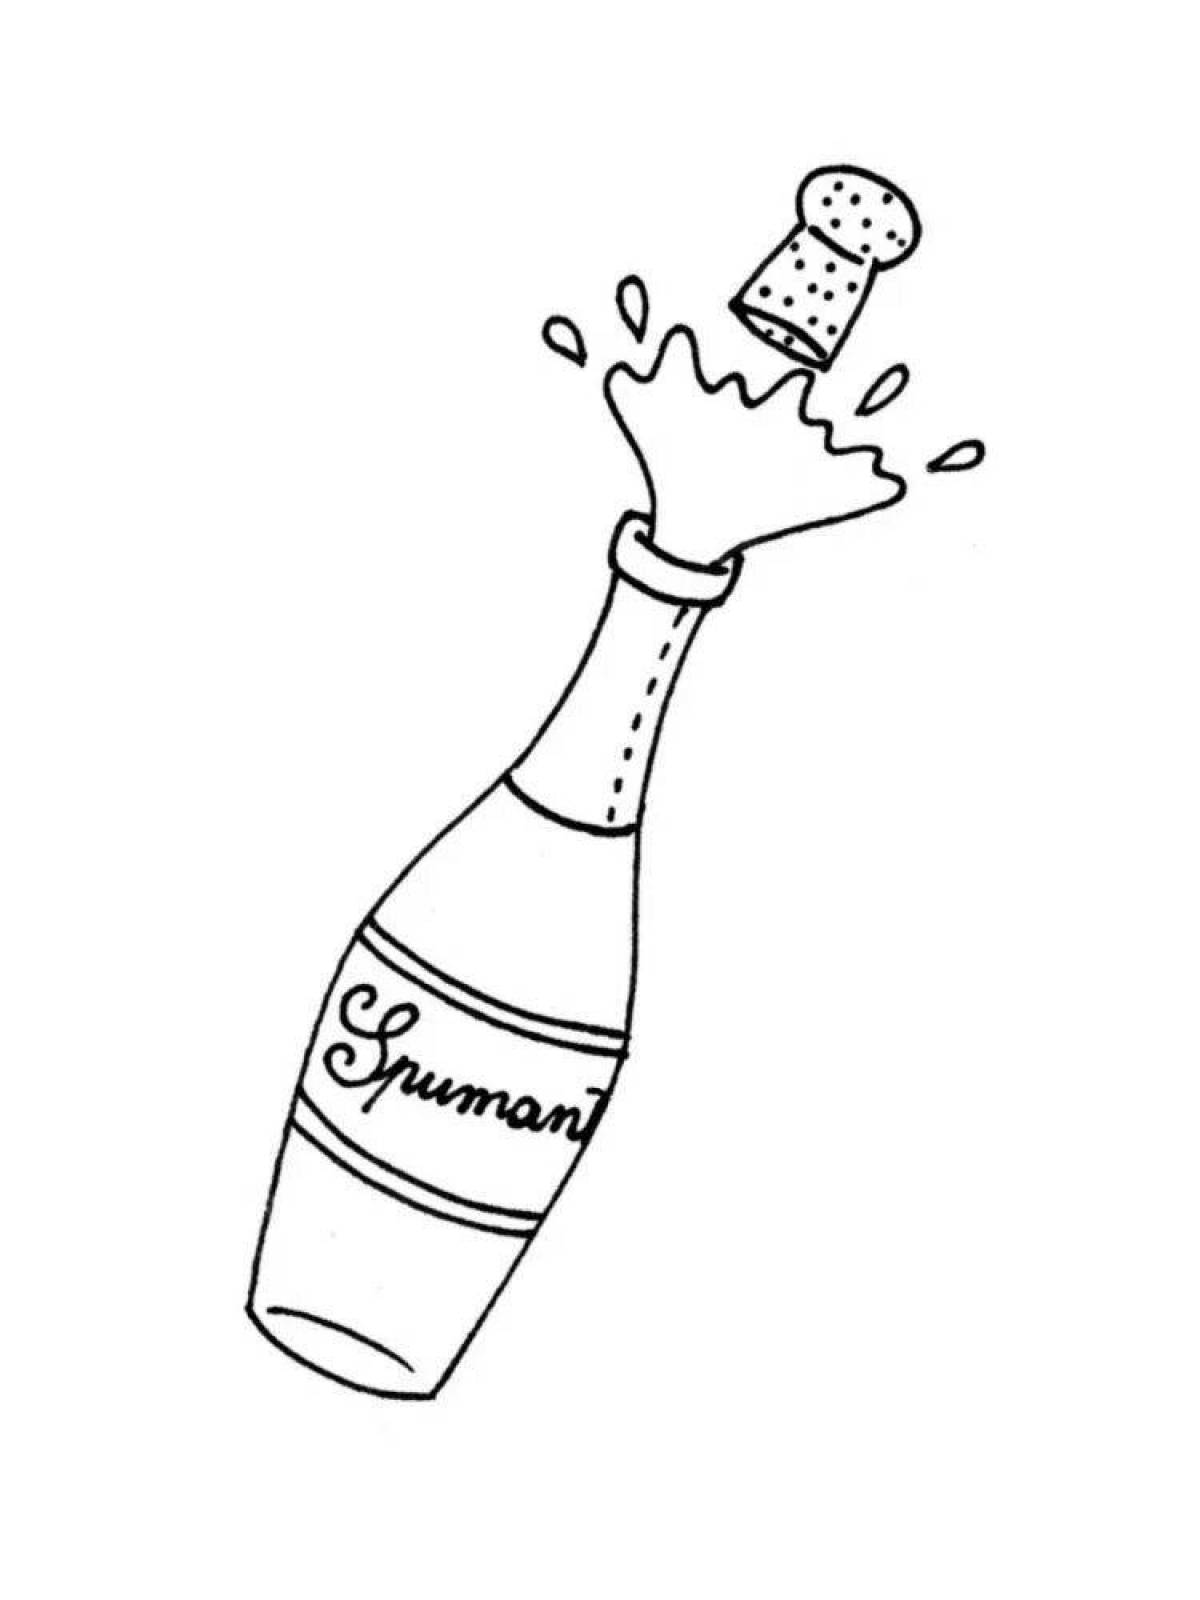 Grand bottle coloring book